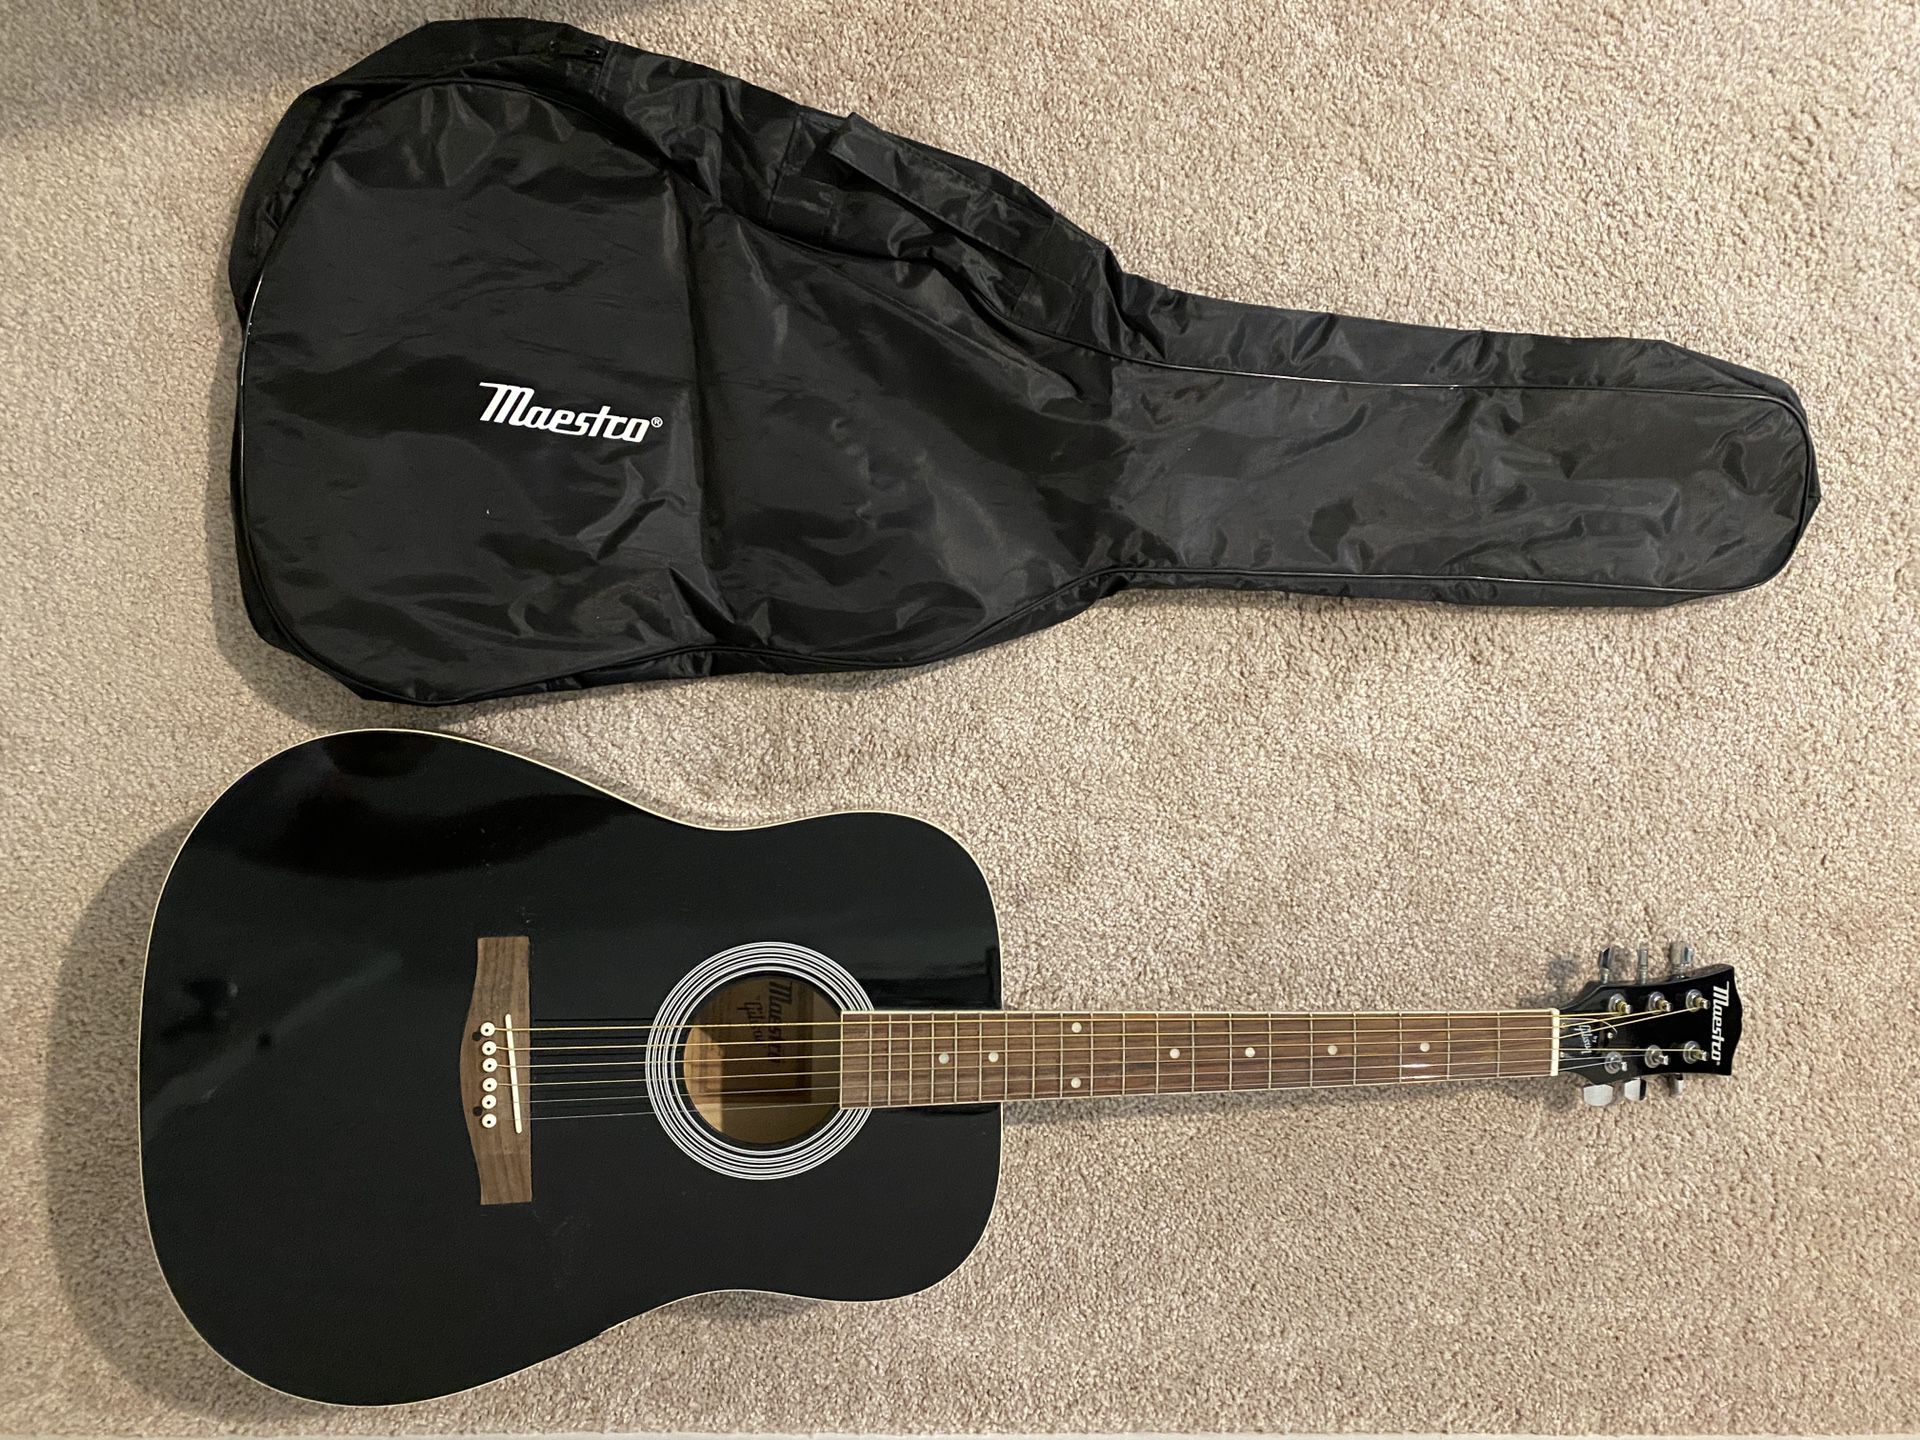 Gibson Maestro Acoustic Guitar with Case